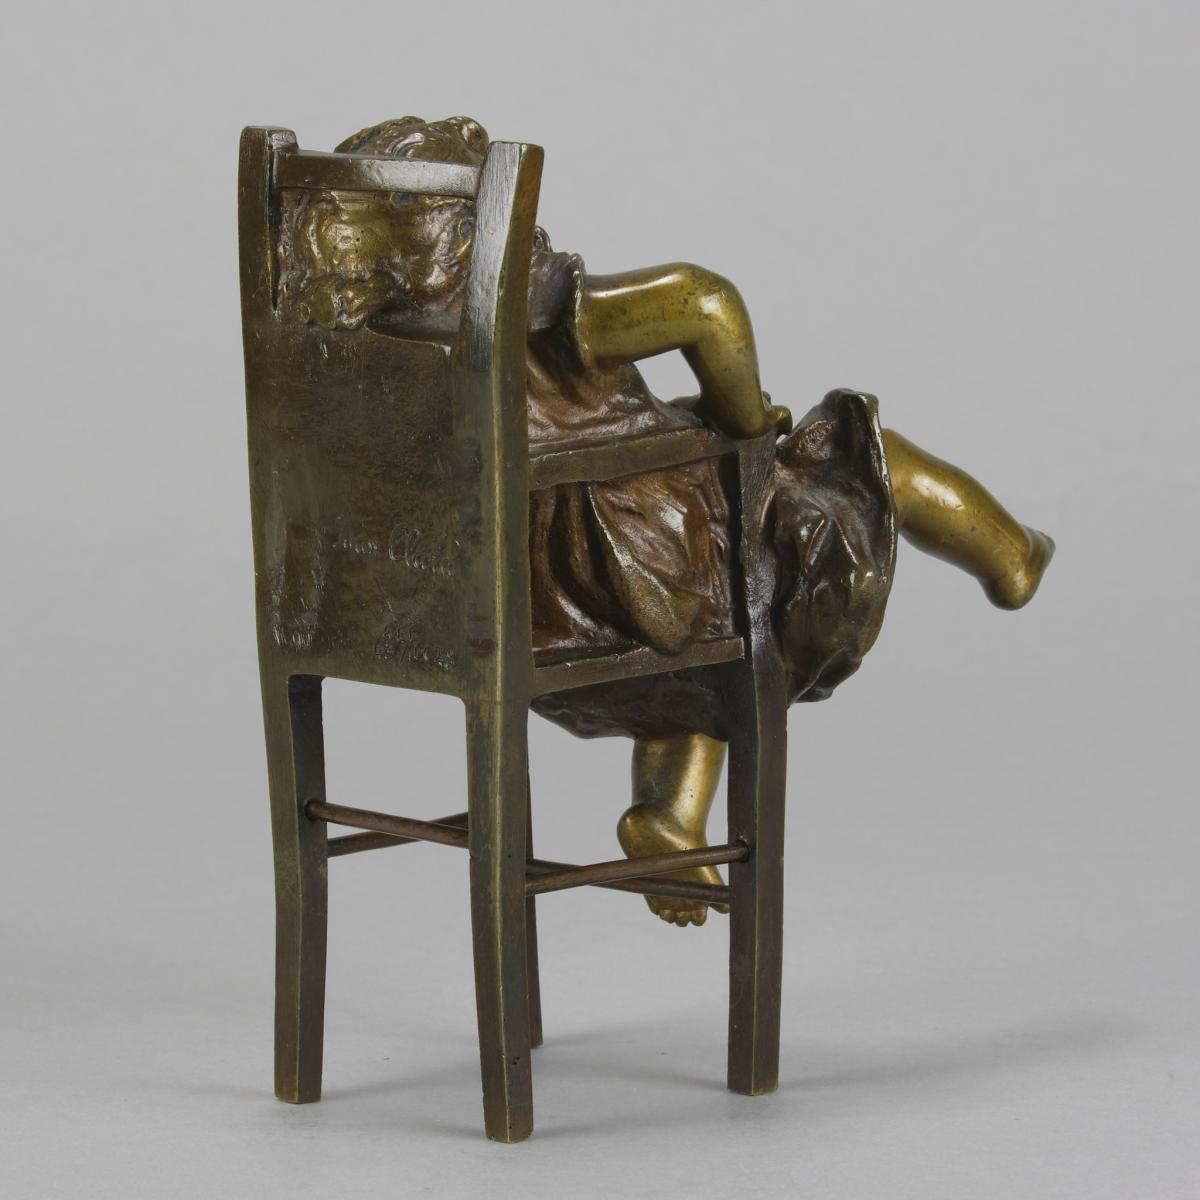 Early 20th Century Spanish Bronze Entitled "Girl on Chair" by Juan Clara